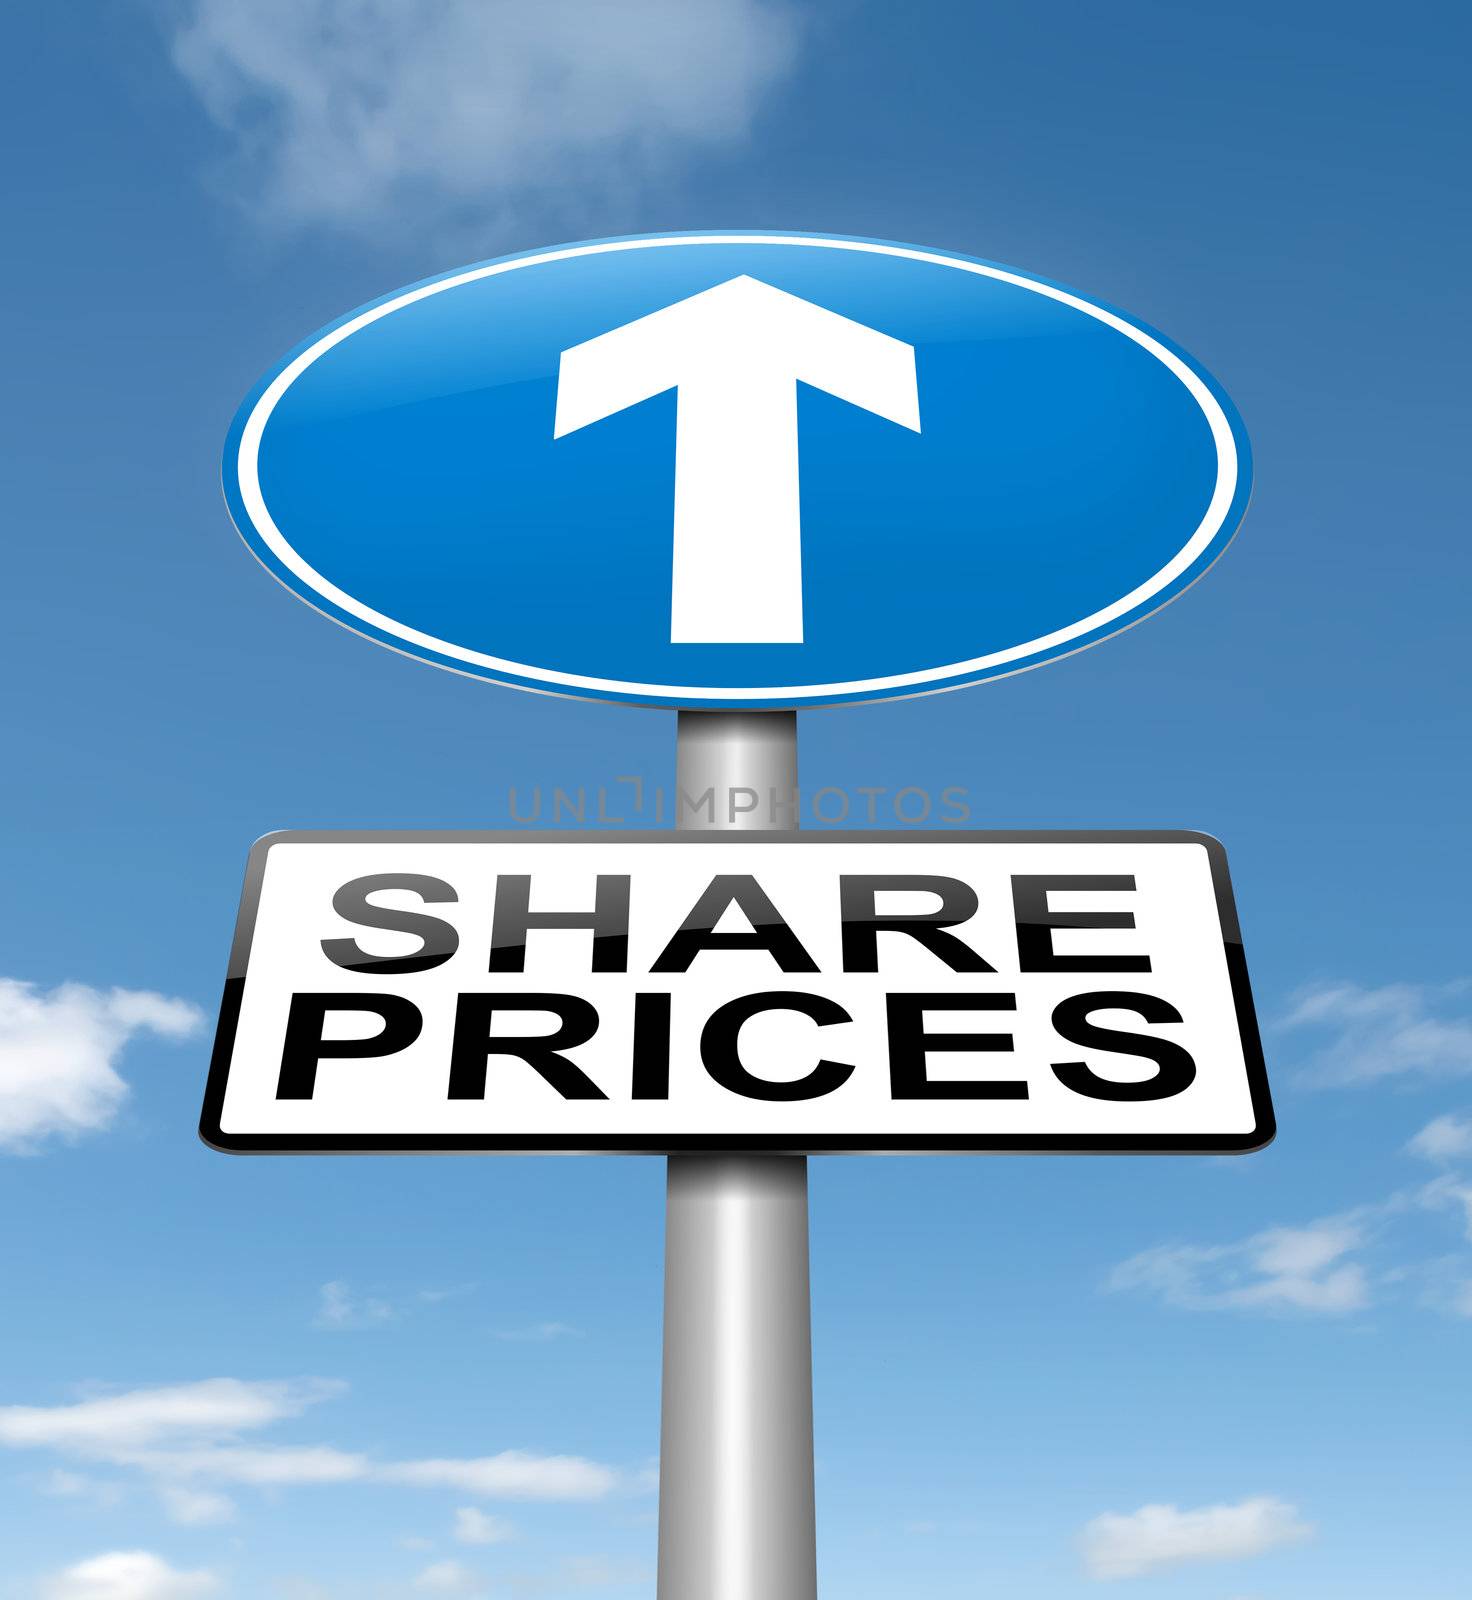 Share price increase. by 72soul